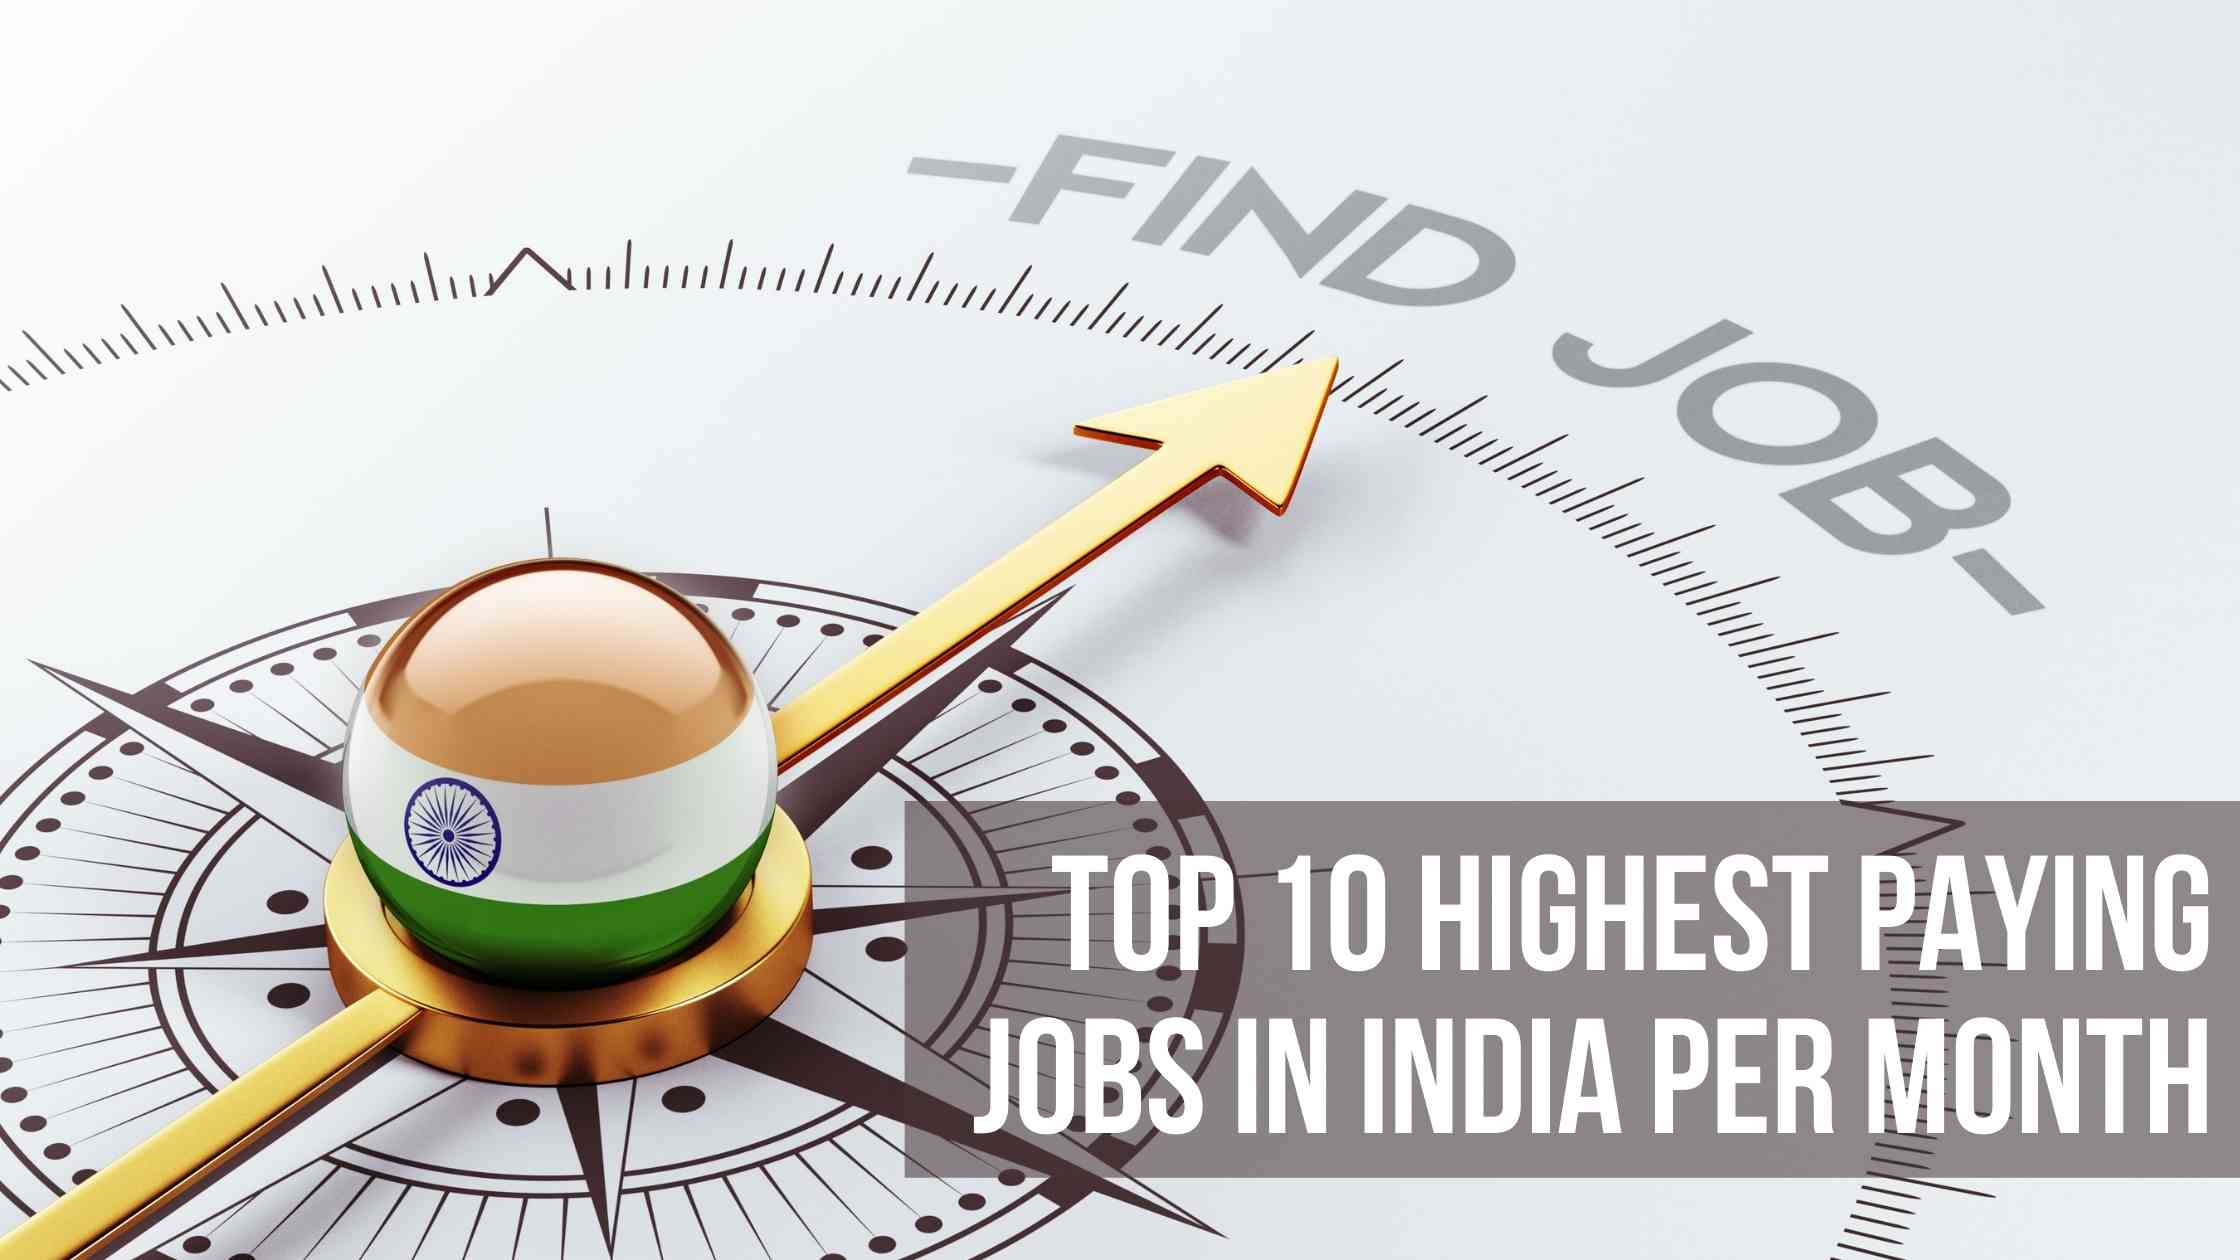 Top 10 Highest Paying Jobs In India Per Month